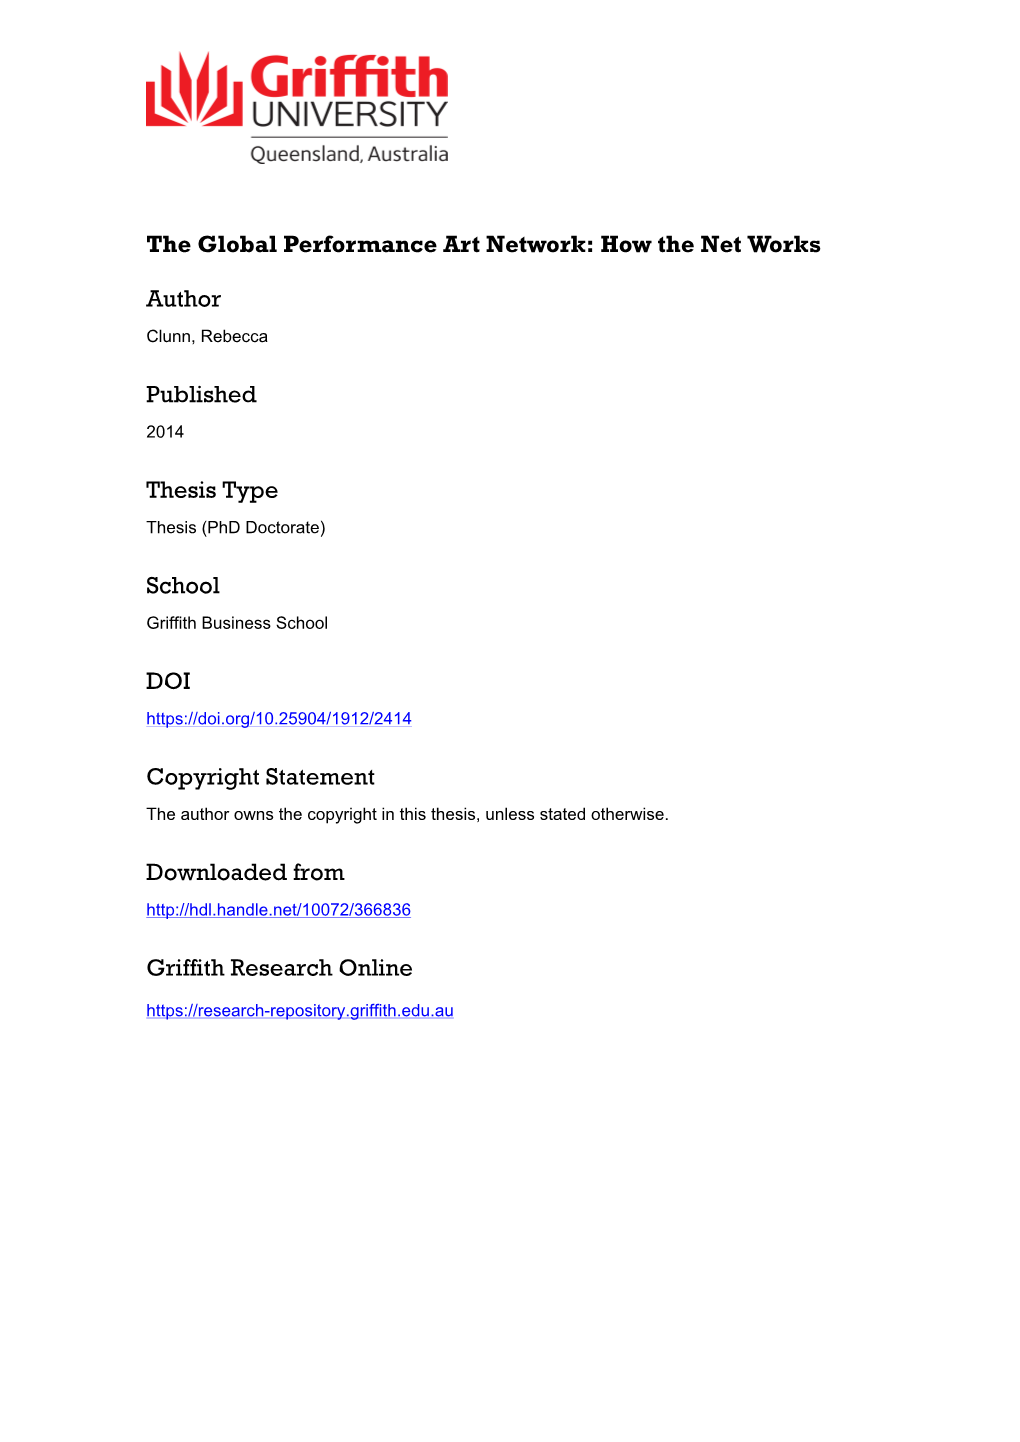 The Global Performance Art Network: How the Net Works